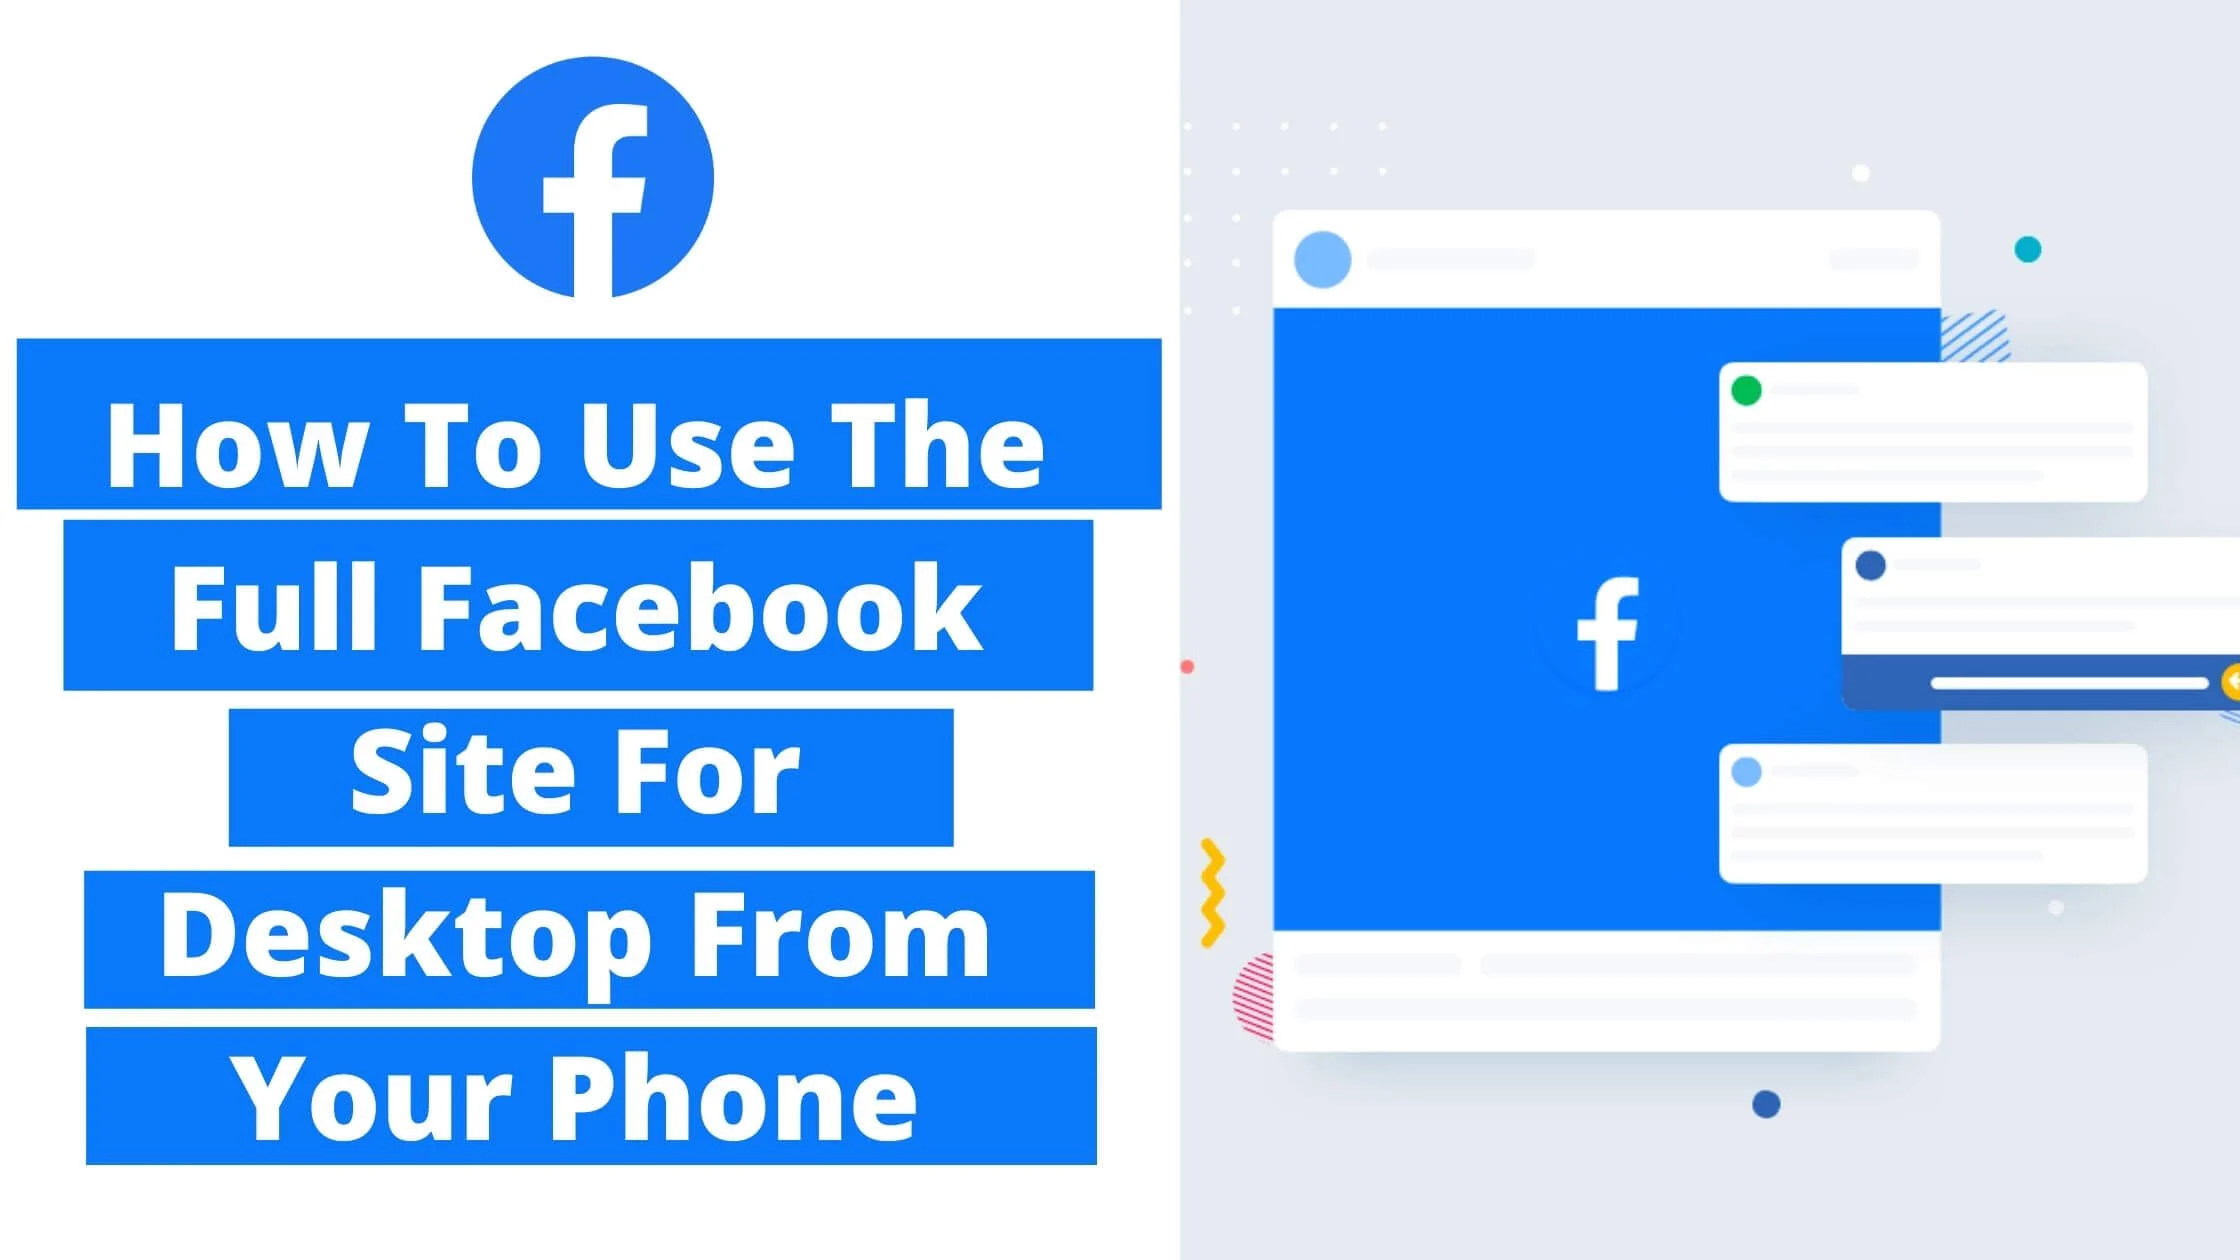 How To Use The Full Facebook Site For Desktop From Your Phone